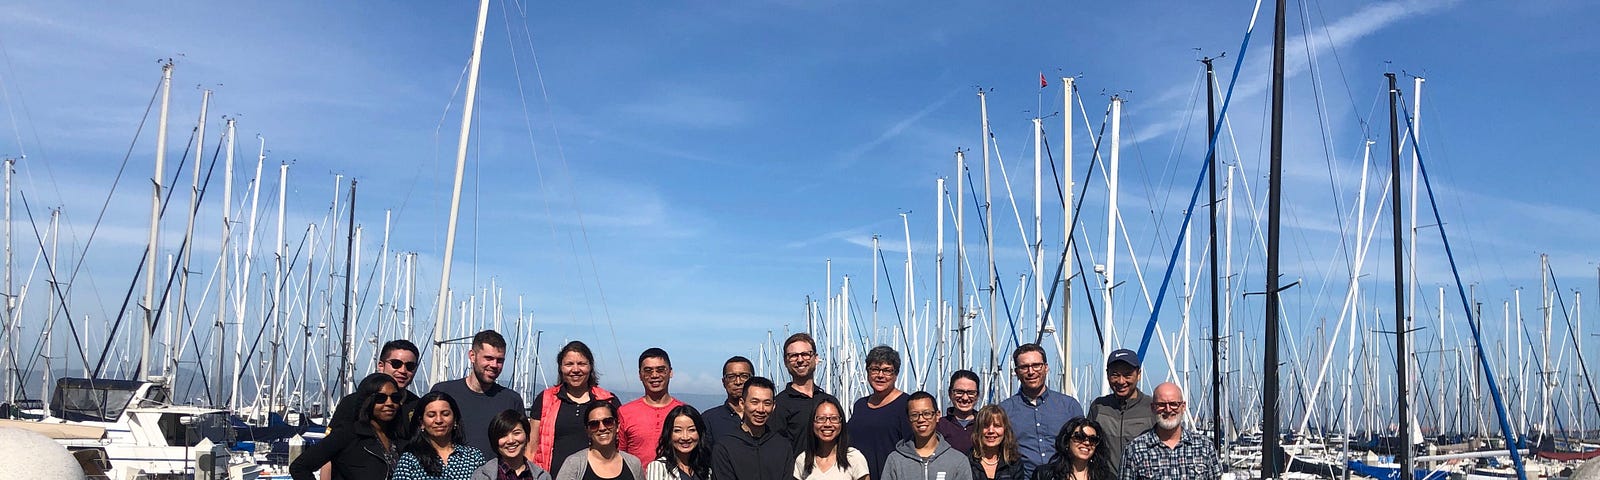 A picture of the Digital Services Team members smiling in the sun in front of some boats at the waterfront in San Francisco